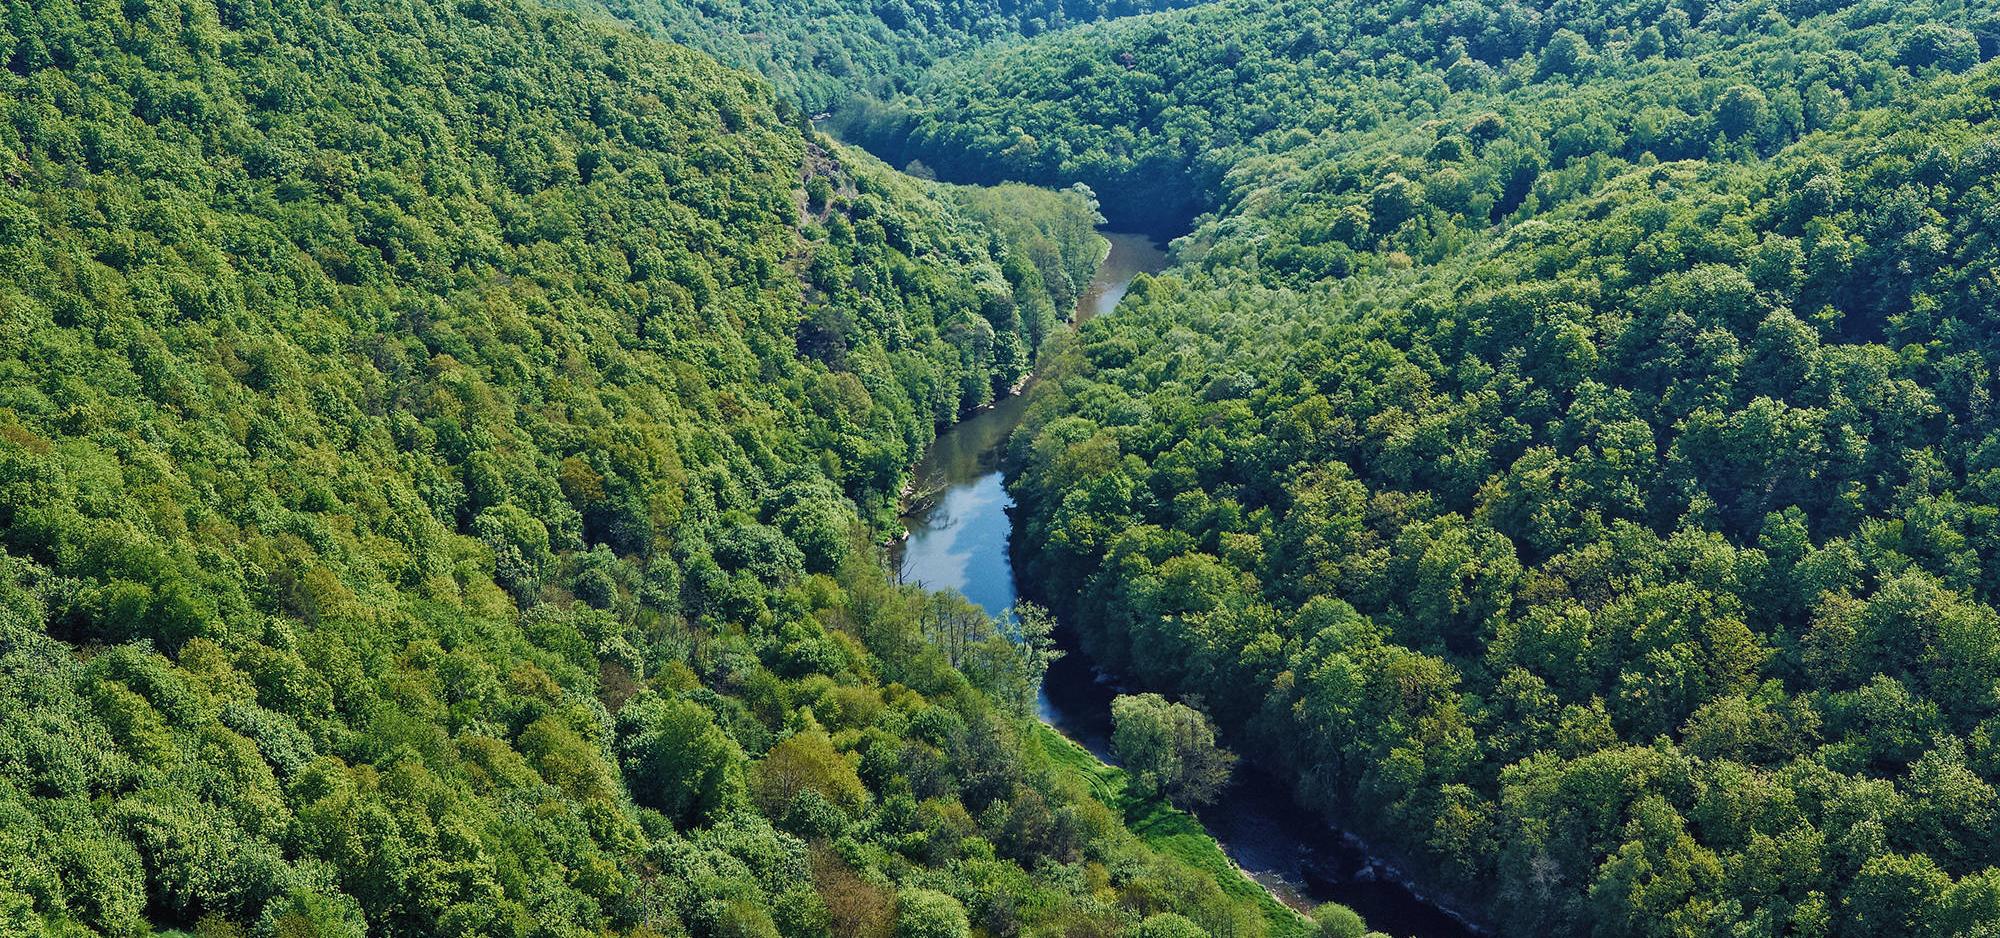 River and forest from above